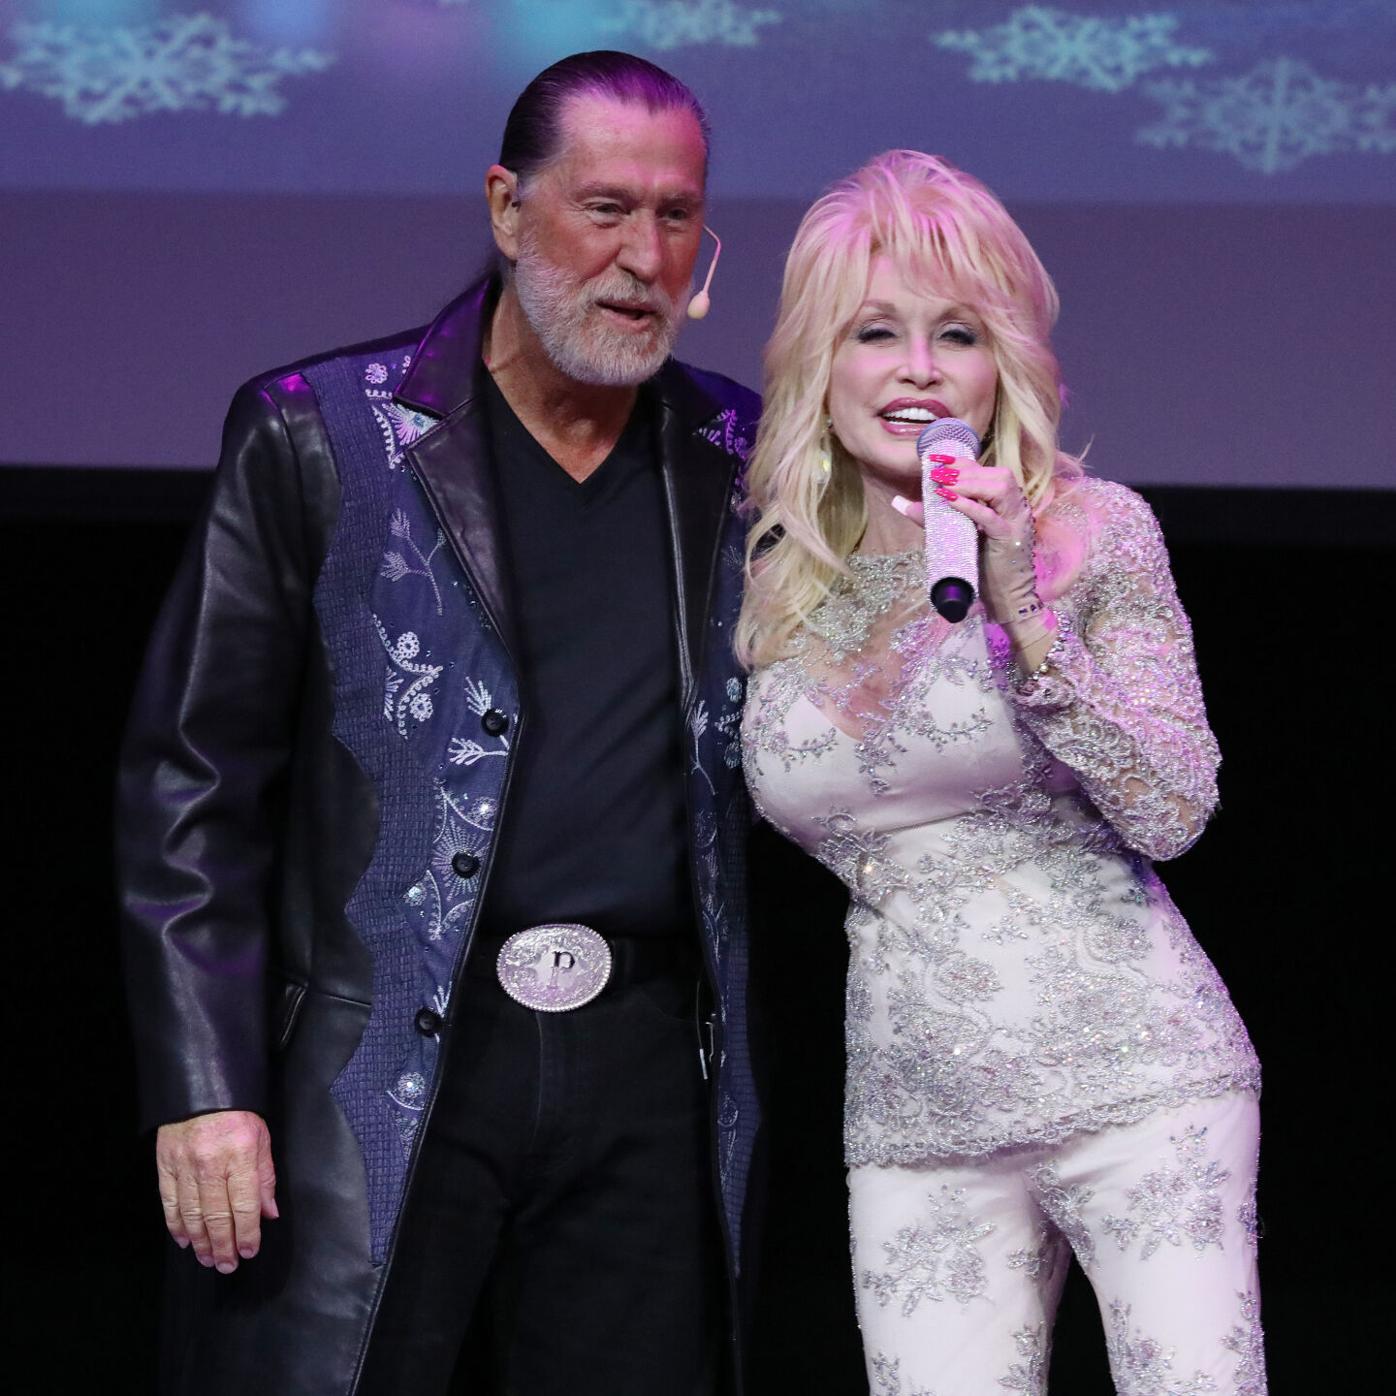 Randy Parton, brother of Dolly, has died | Arts & Entertainment |  